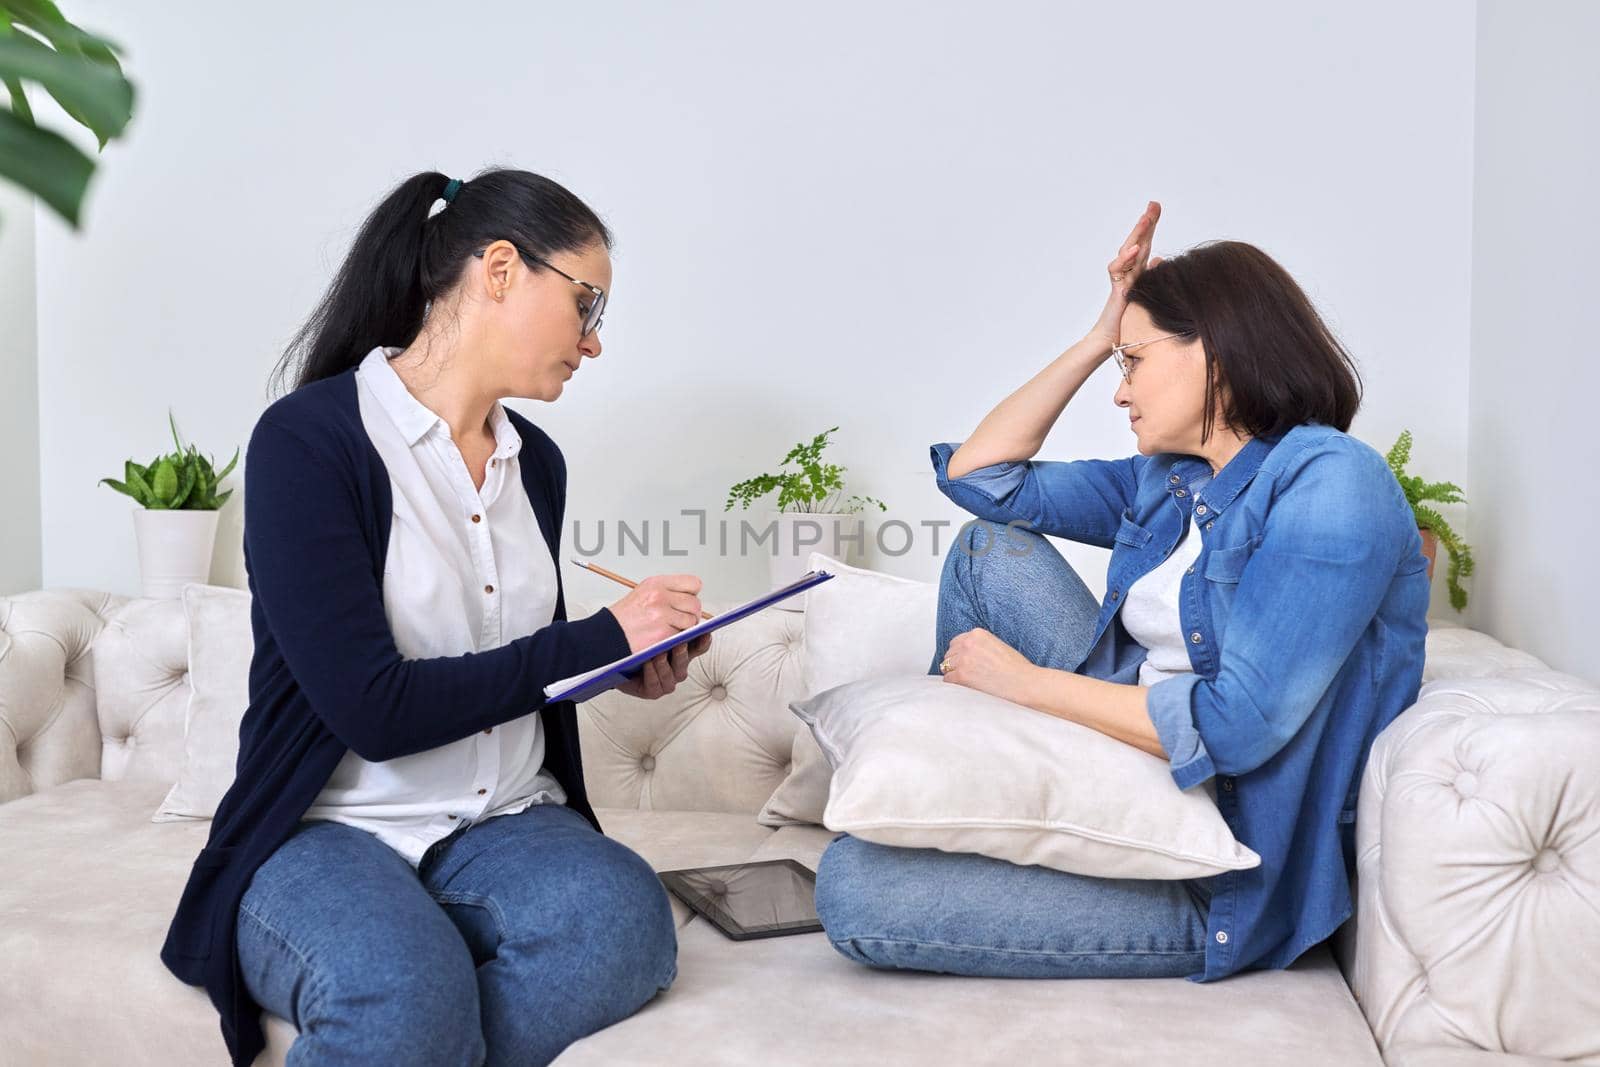 Mature woman at meeting with psychologist, therapist, counselor by VH-studio